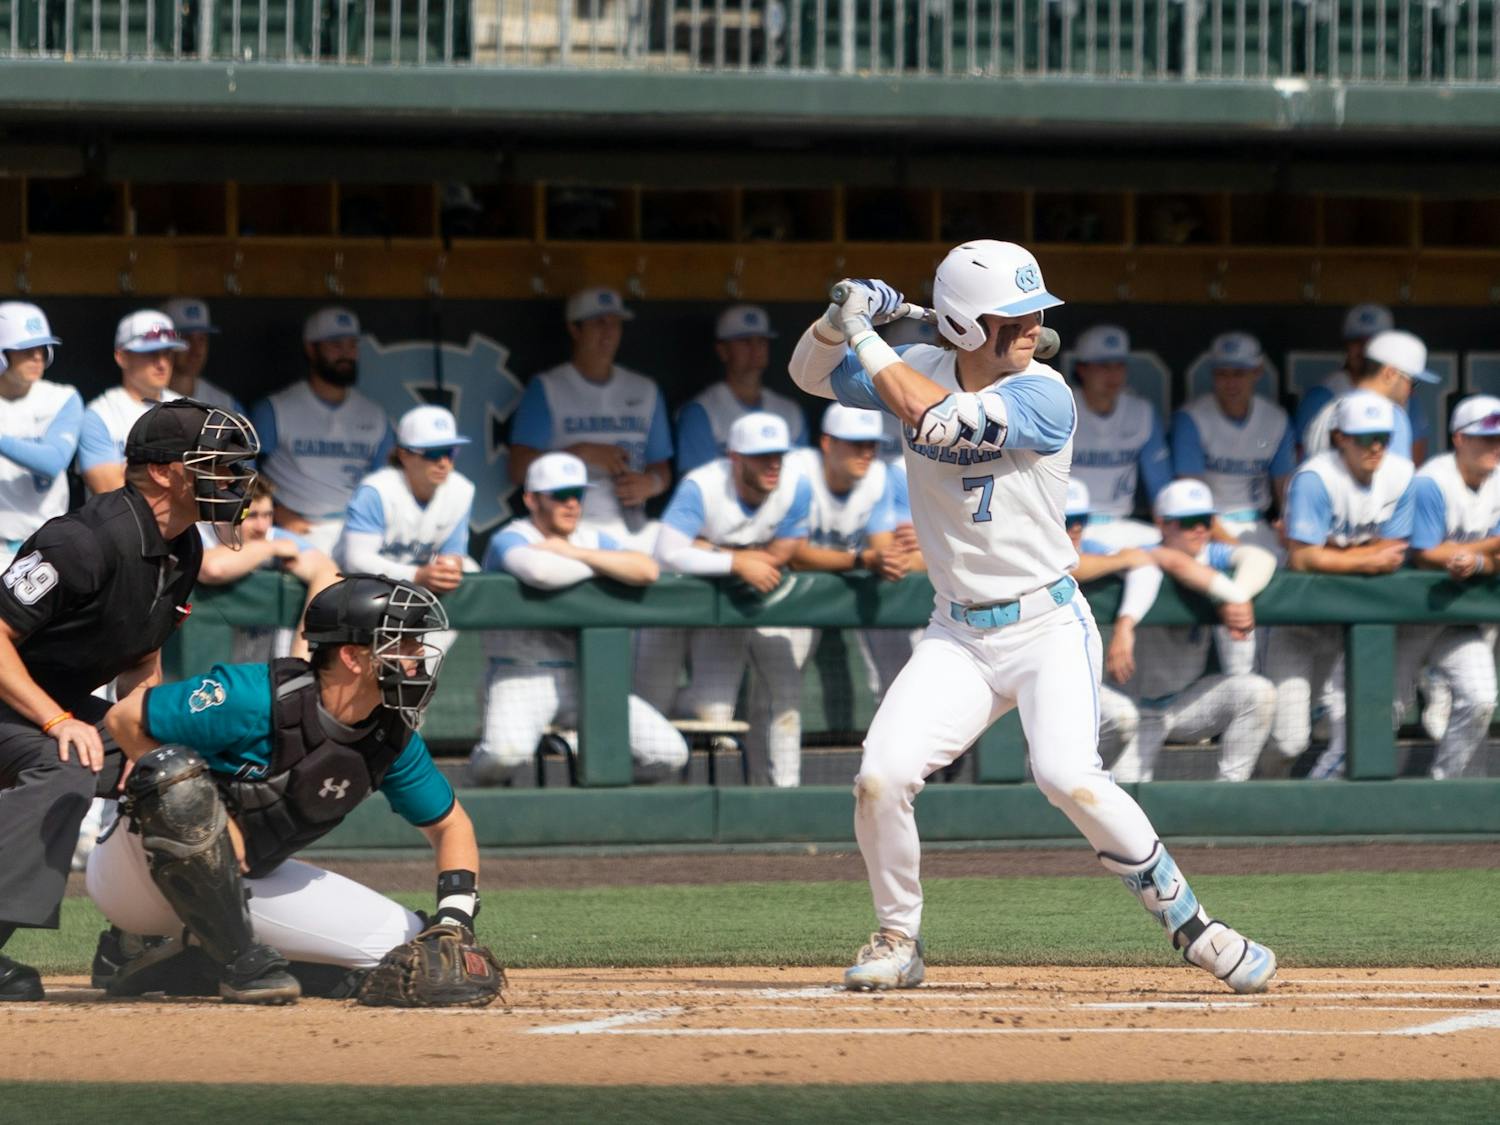 UNC sophomore Vance Honeycutt (7) waits for the pitch during the baseball game against Costal Carolina on Tuesday, March 27, 2023, at Boshamer Stadium. UNC fell to Costal Carolina 7-12.